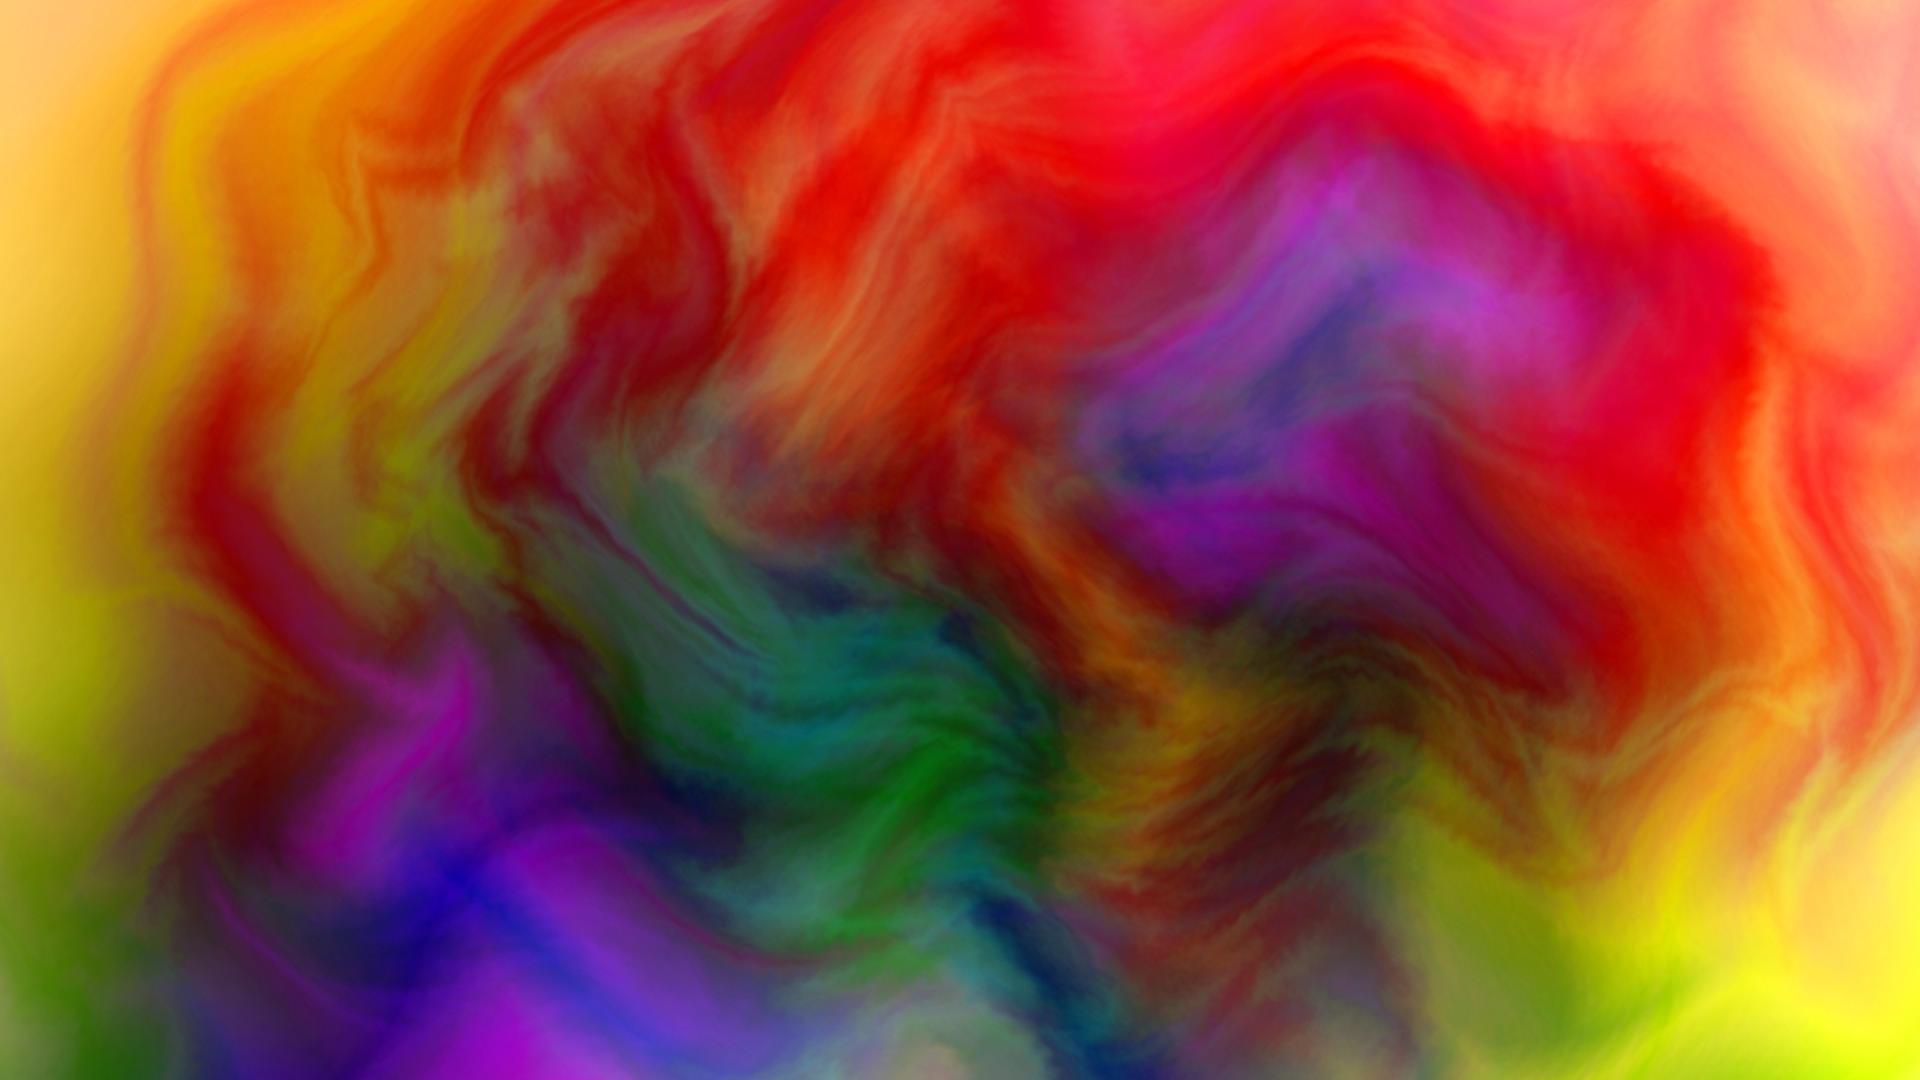 Wallpapers Trippy Colors Abstract Art Free Hd Images 1920x1080 ...